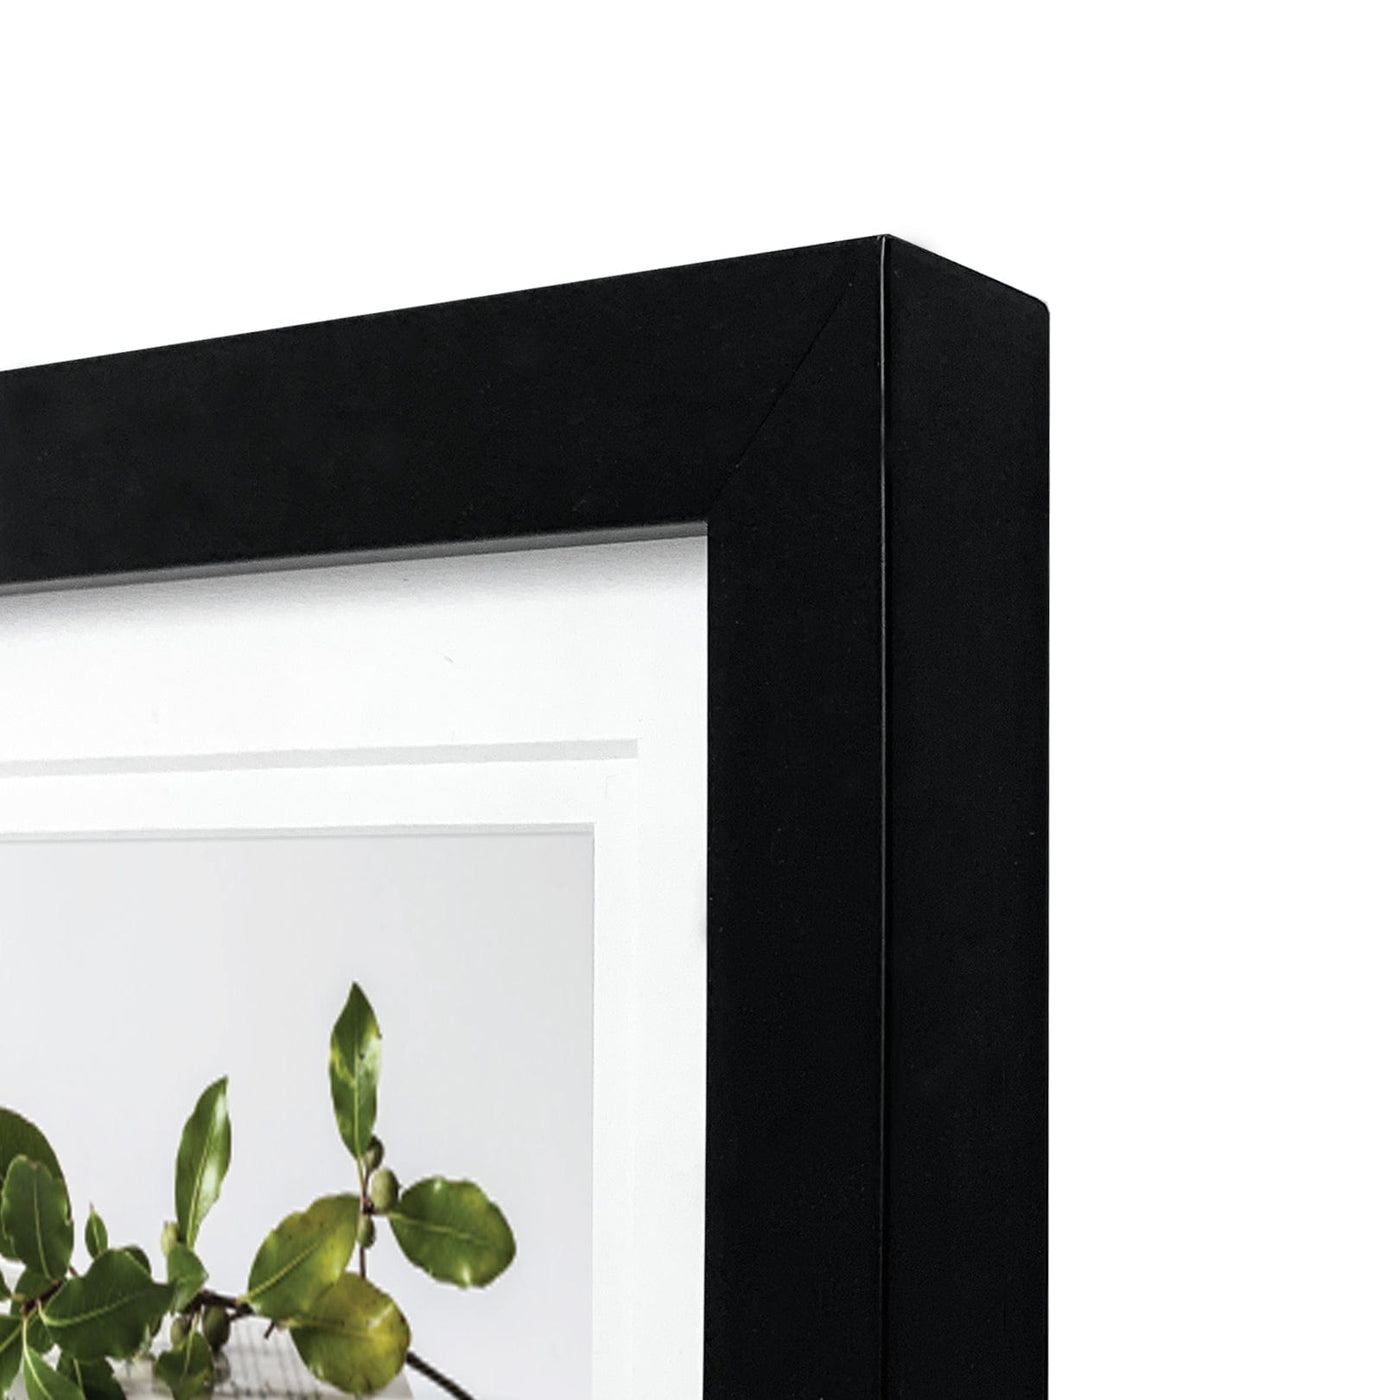 10420 Black 10x10/8x8 (3pk) from our Australian Made Picture Frames collection by Profile Australia